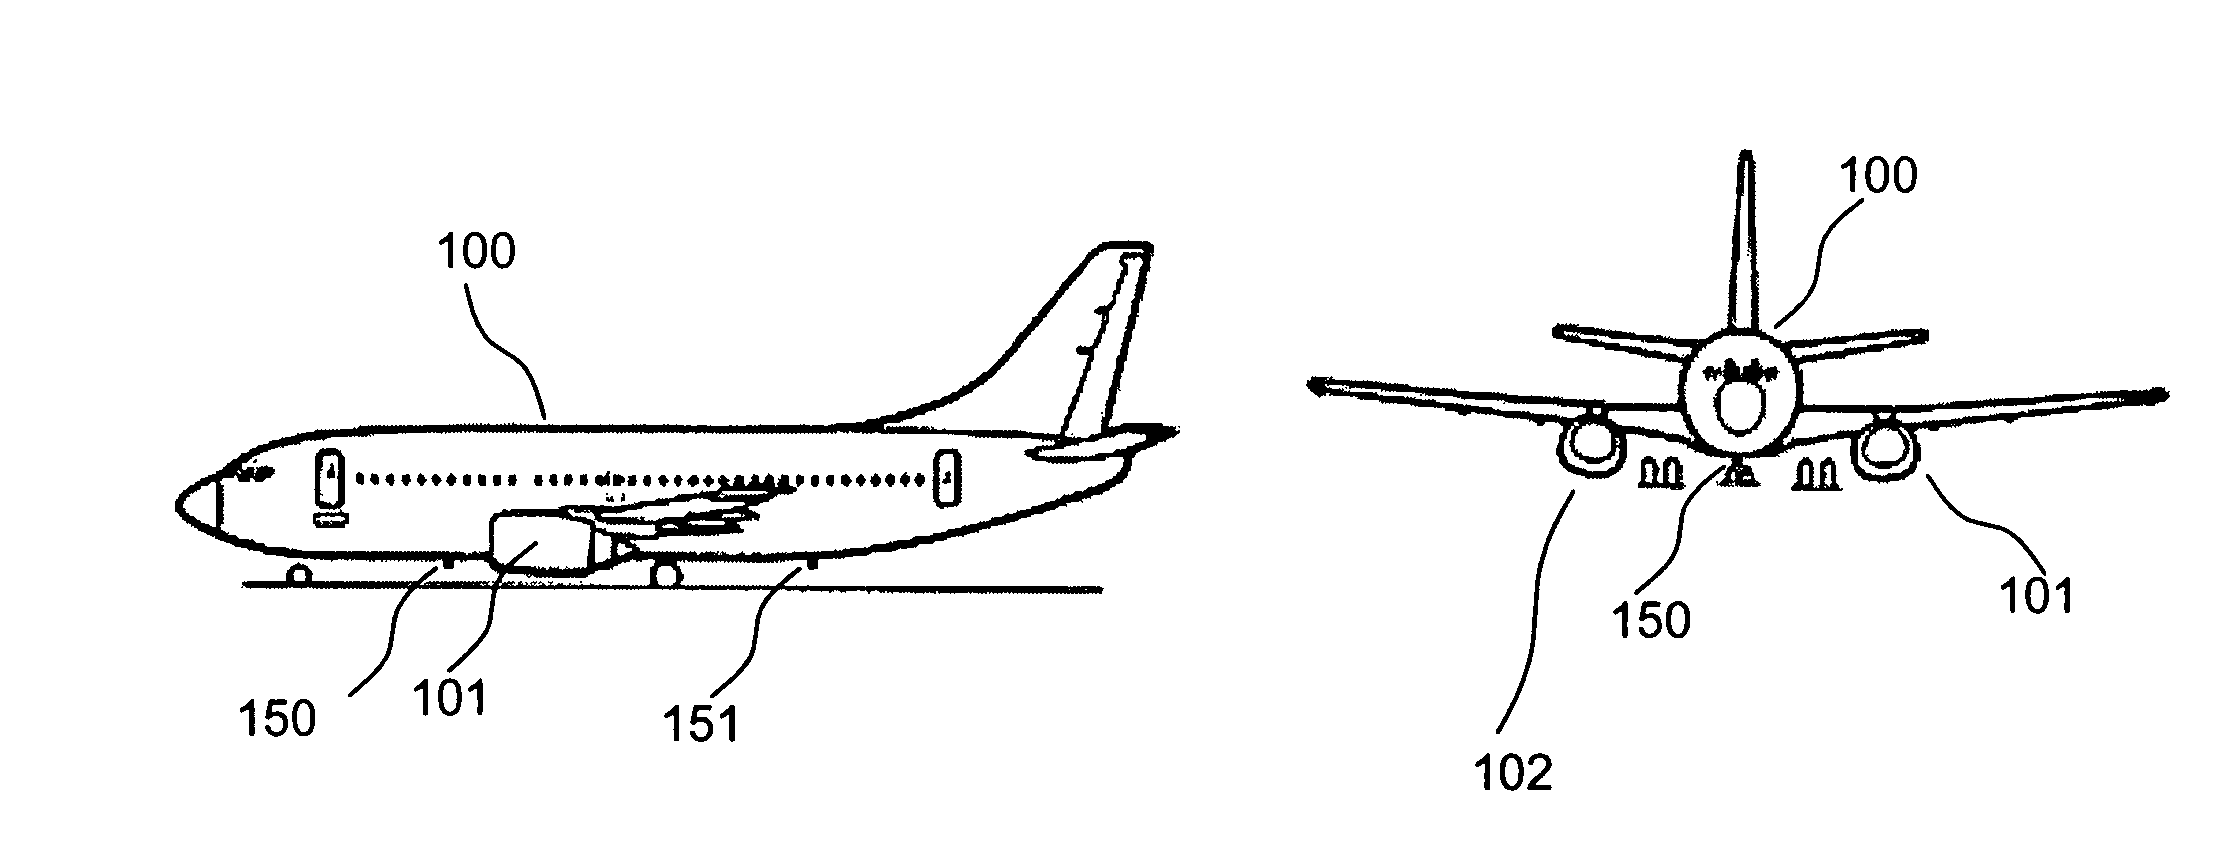 System for managing the multiple air-to-ground communications links originating from each aircraft in an air-to-ground cellular communication network